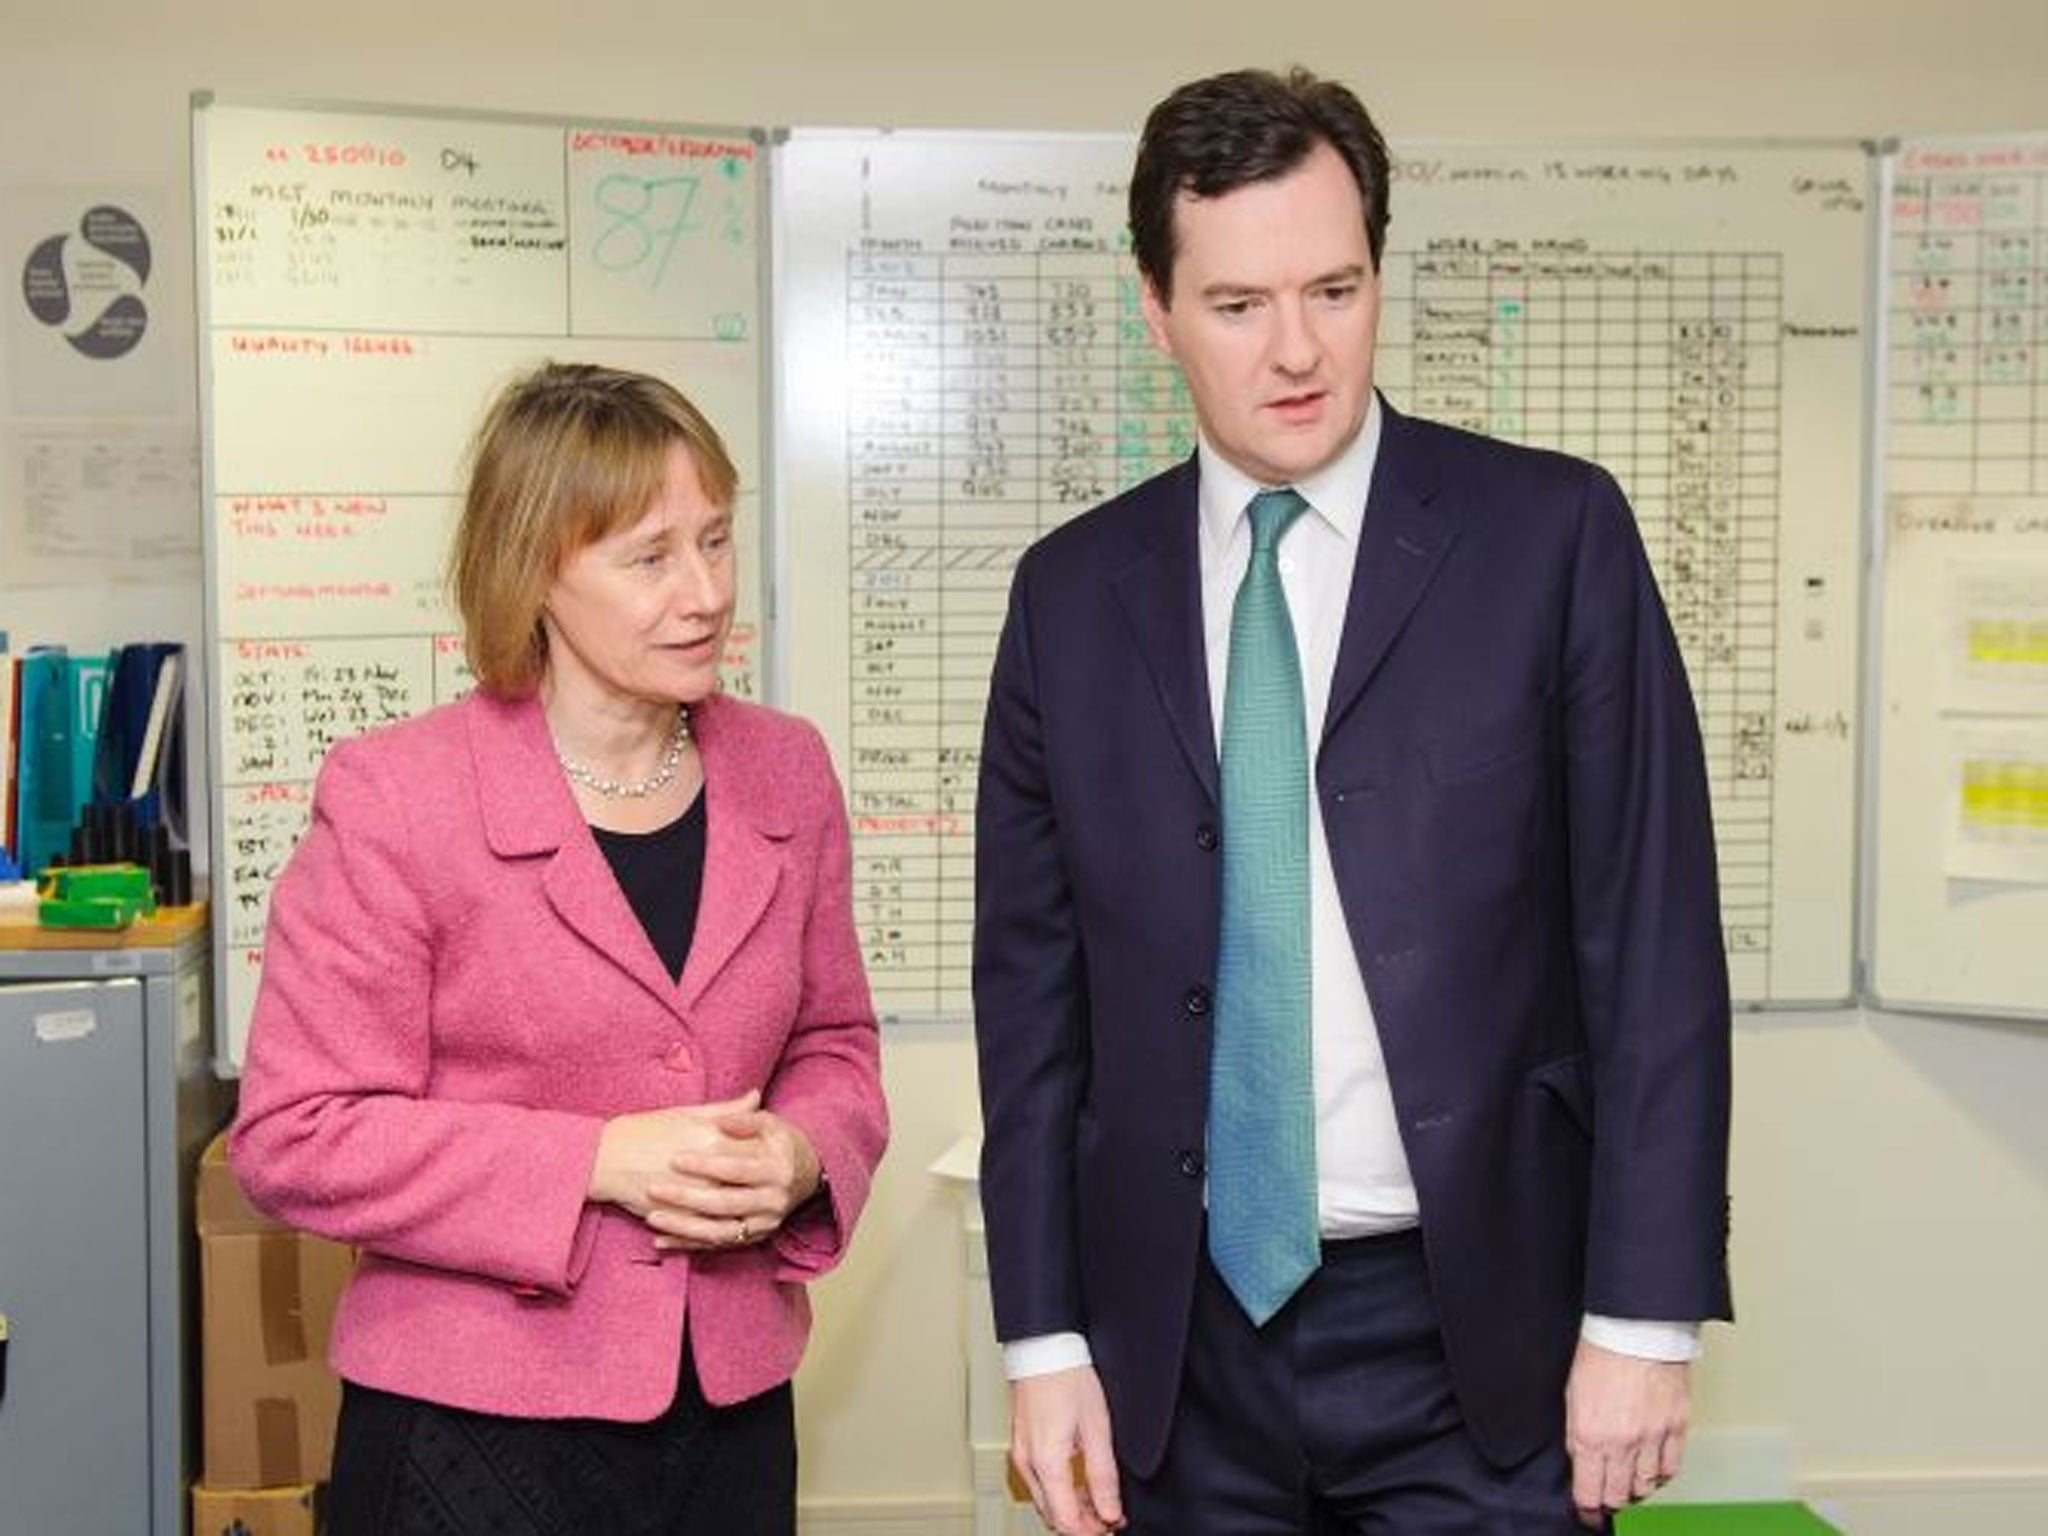 Lin Homer, Chief Executive of HMRC, left, and Chancellor George Osborne during a visit to the offices of HM Revenue & Customs (HMRC). Customers will no longer be left hanging on premium rate numbers when they contact HM Revenue and Customs (HMRC), the tax